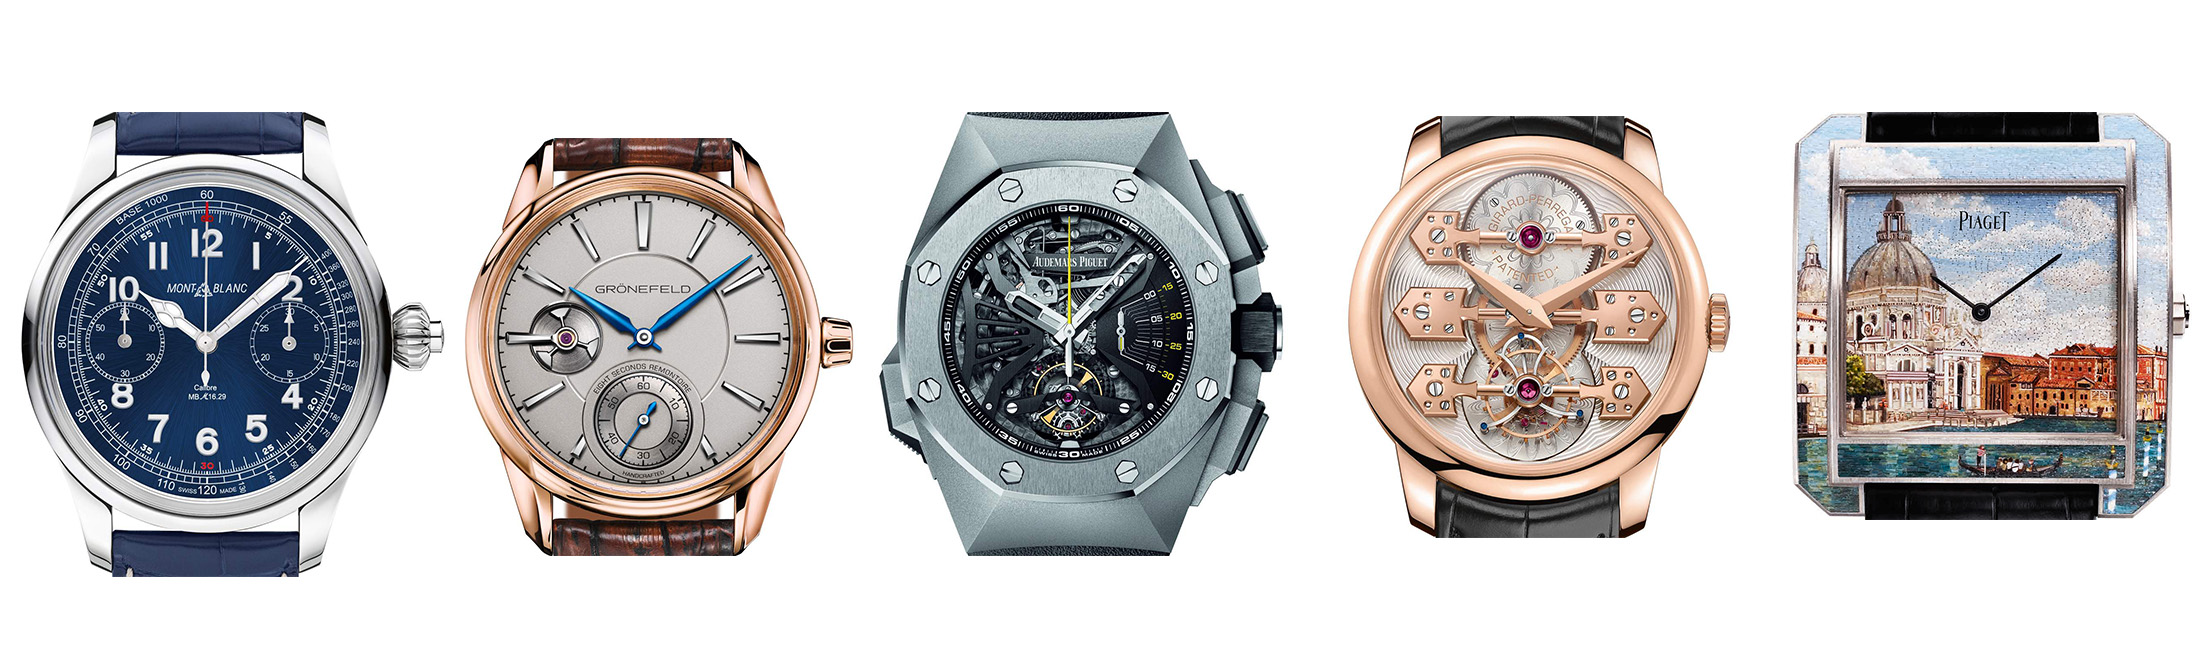 The Best Watches of 2016, According to the Oscars of Watchmaking ...